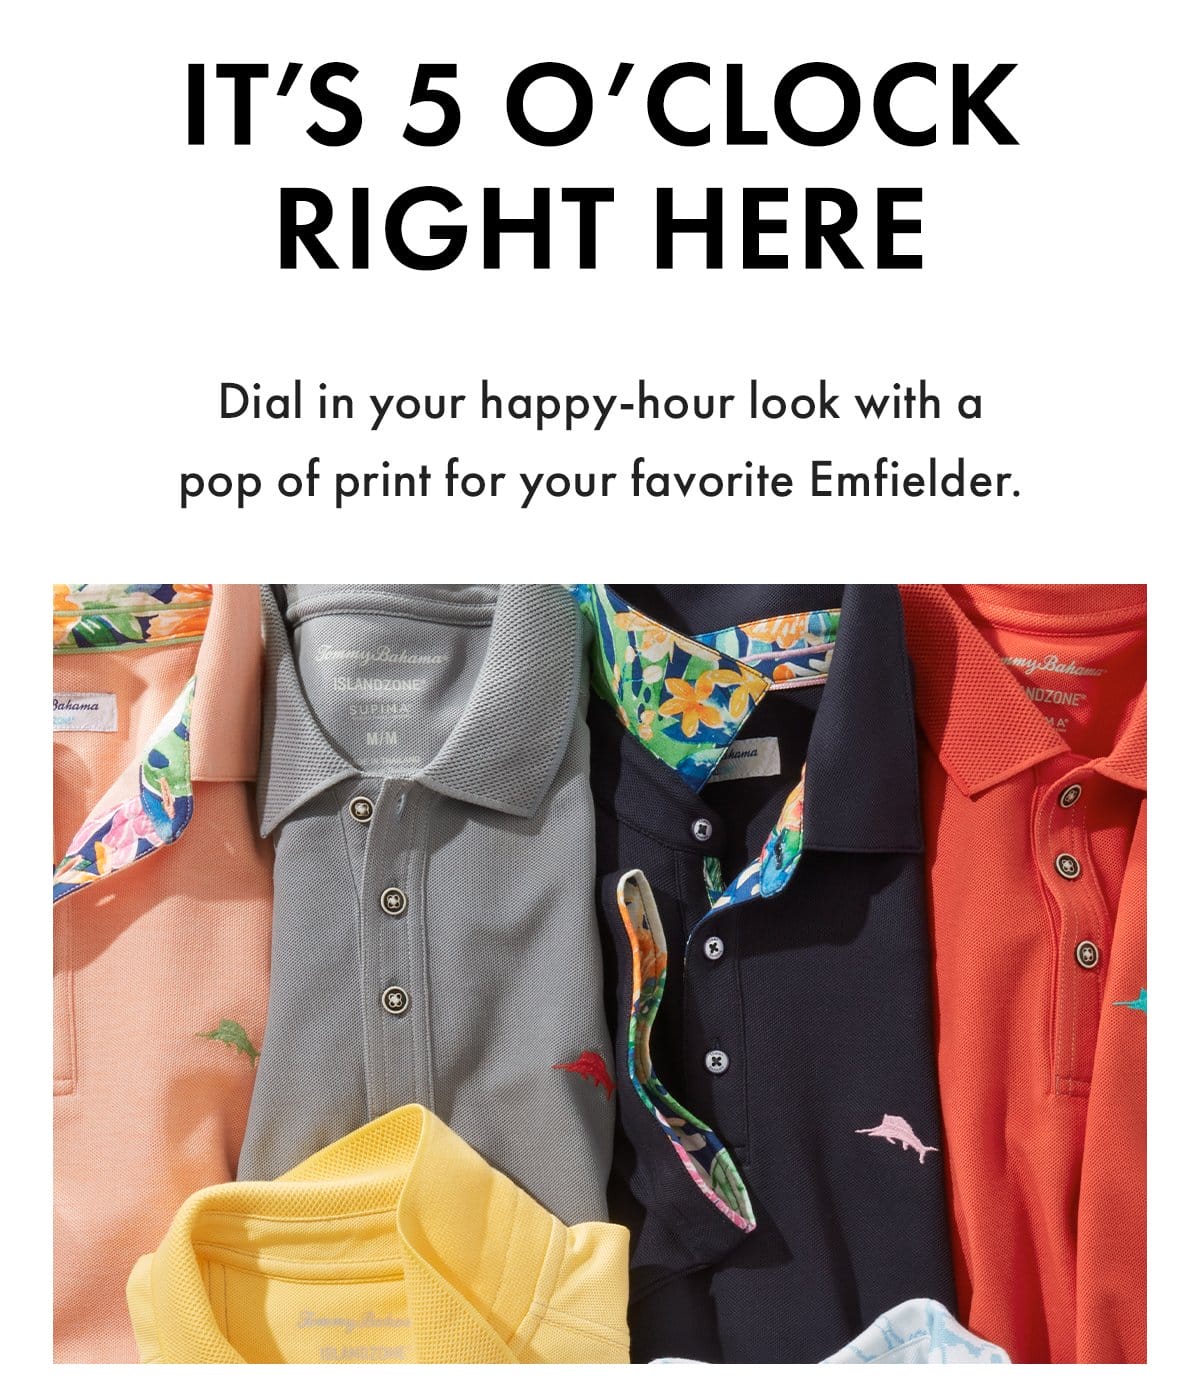 It's 5 O'Clock Right Here. Dial in your happy-hour look with a pop of print for your favorite Emfielder.